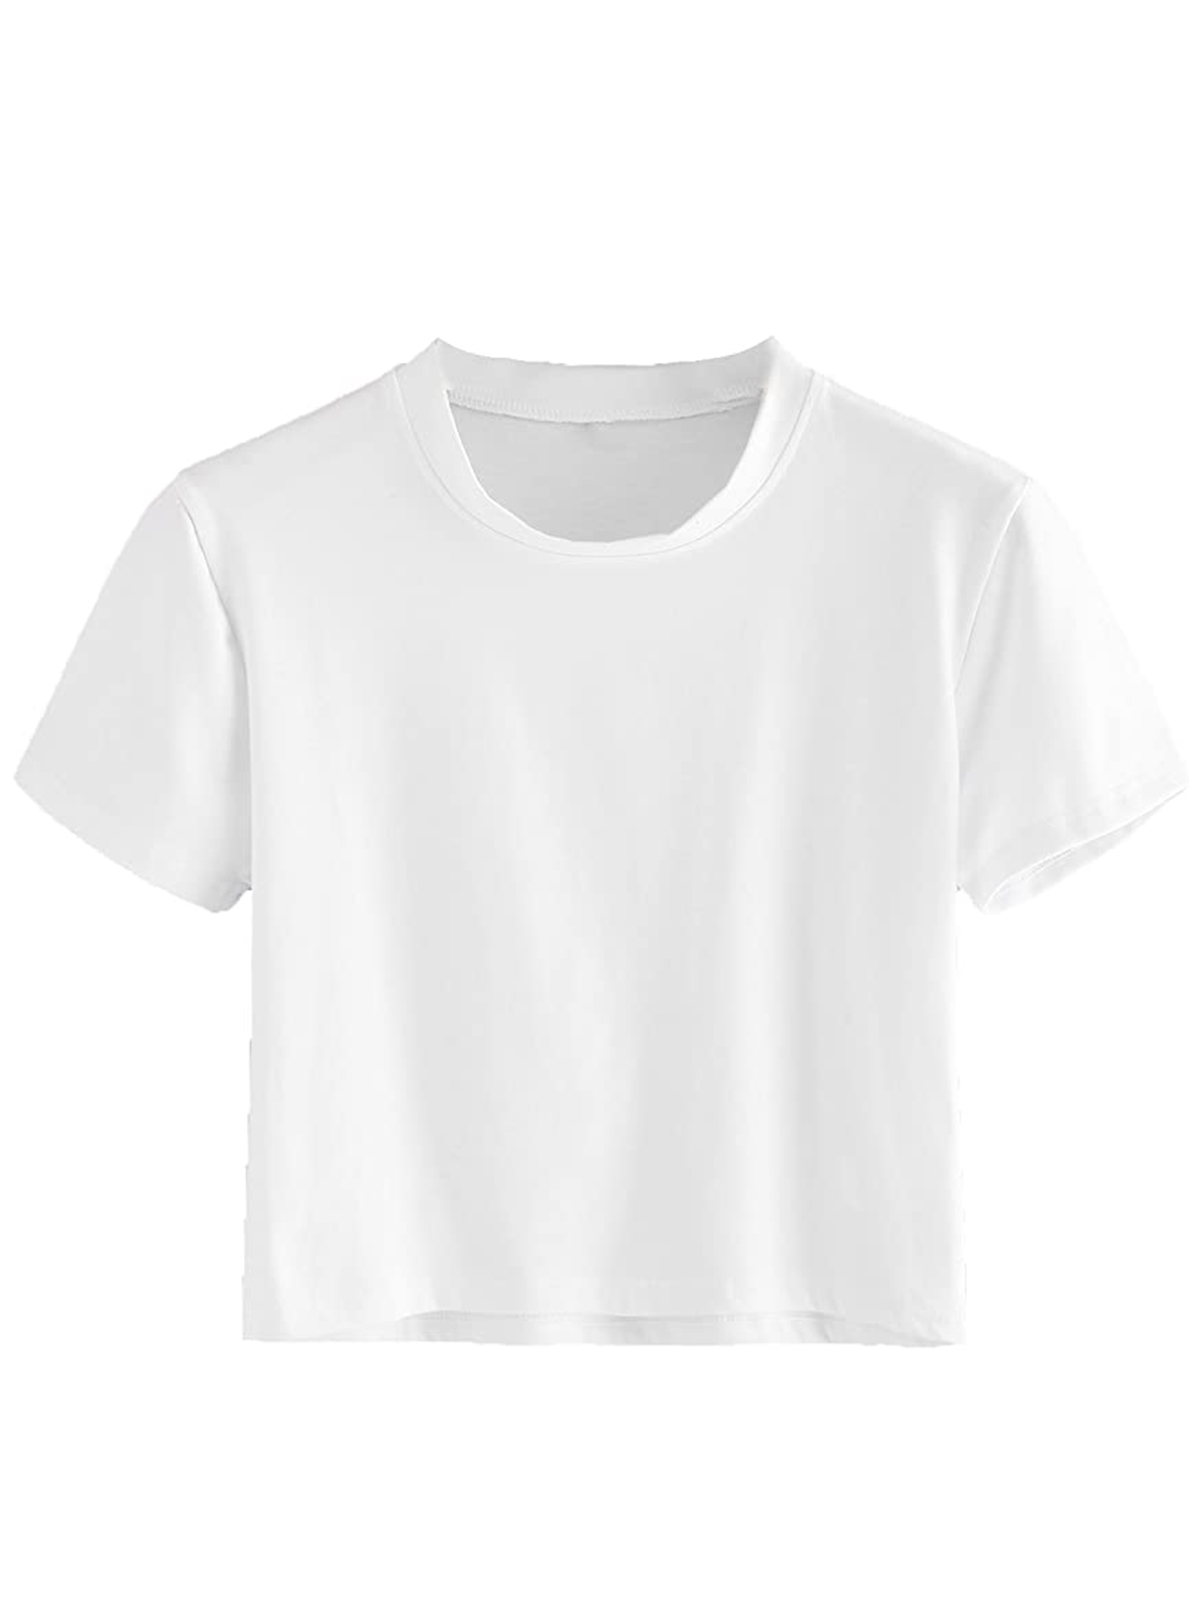 white t shirt summer outfits